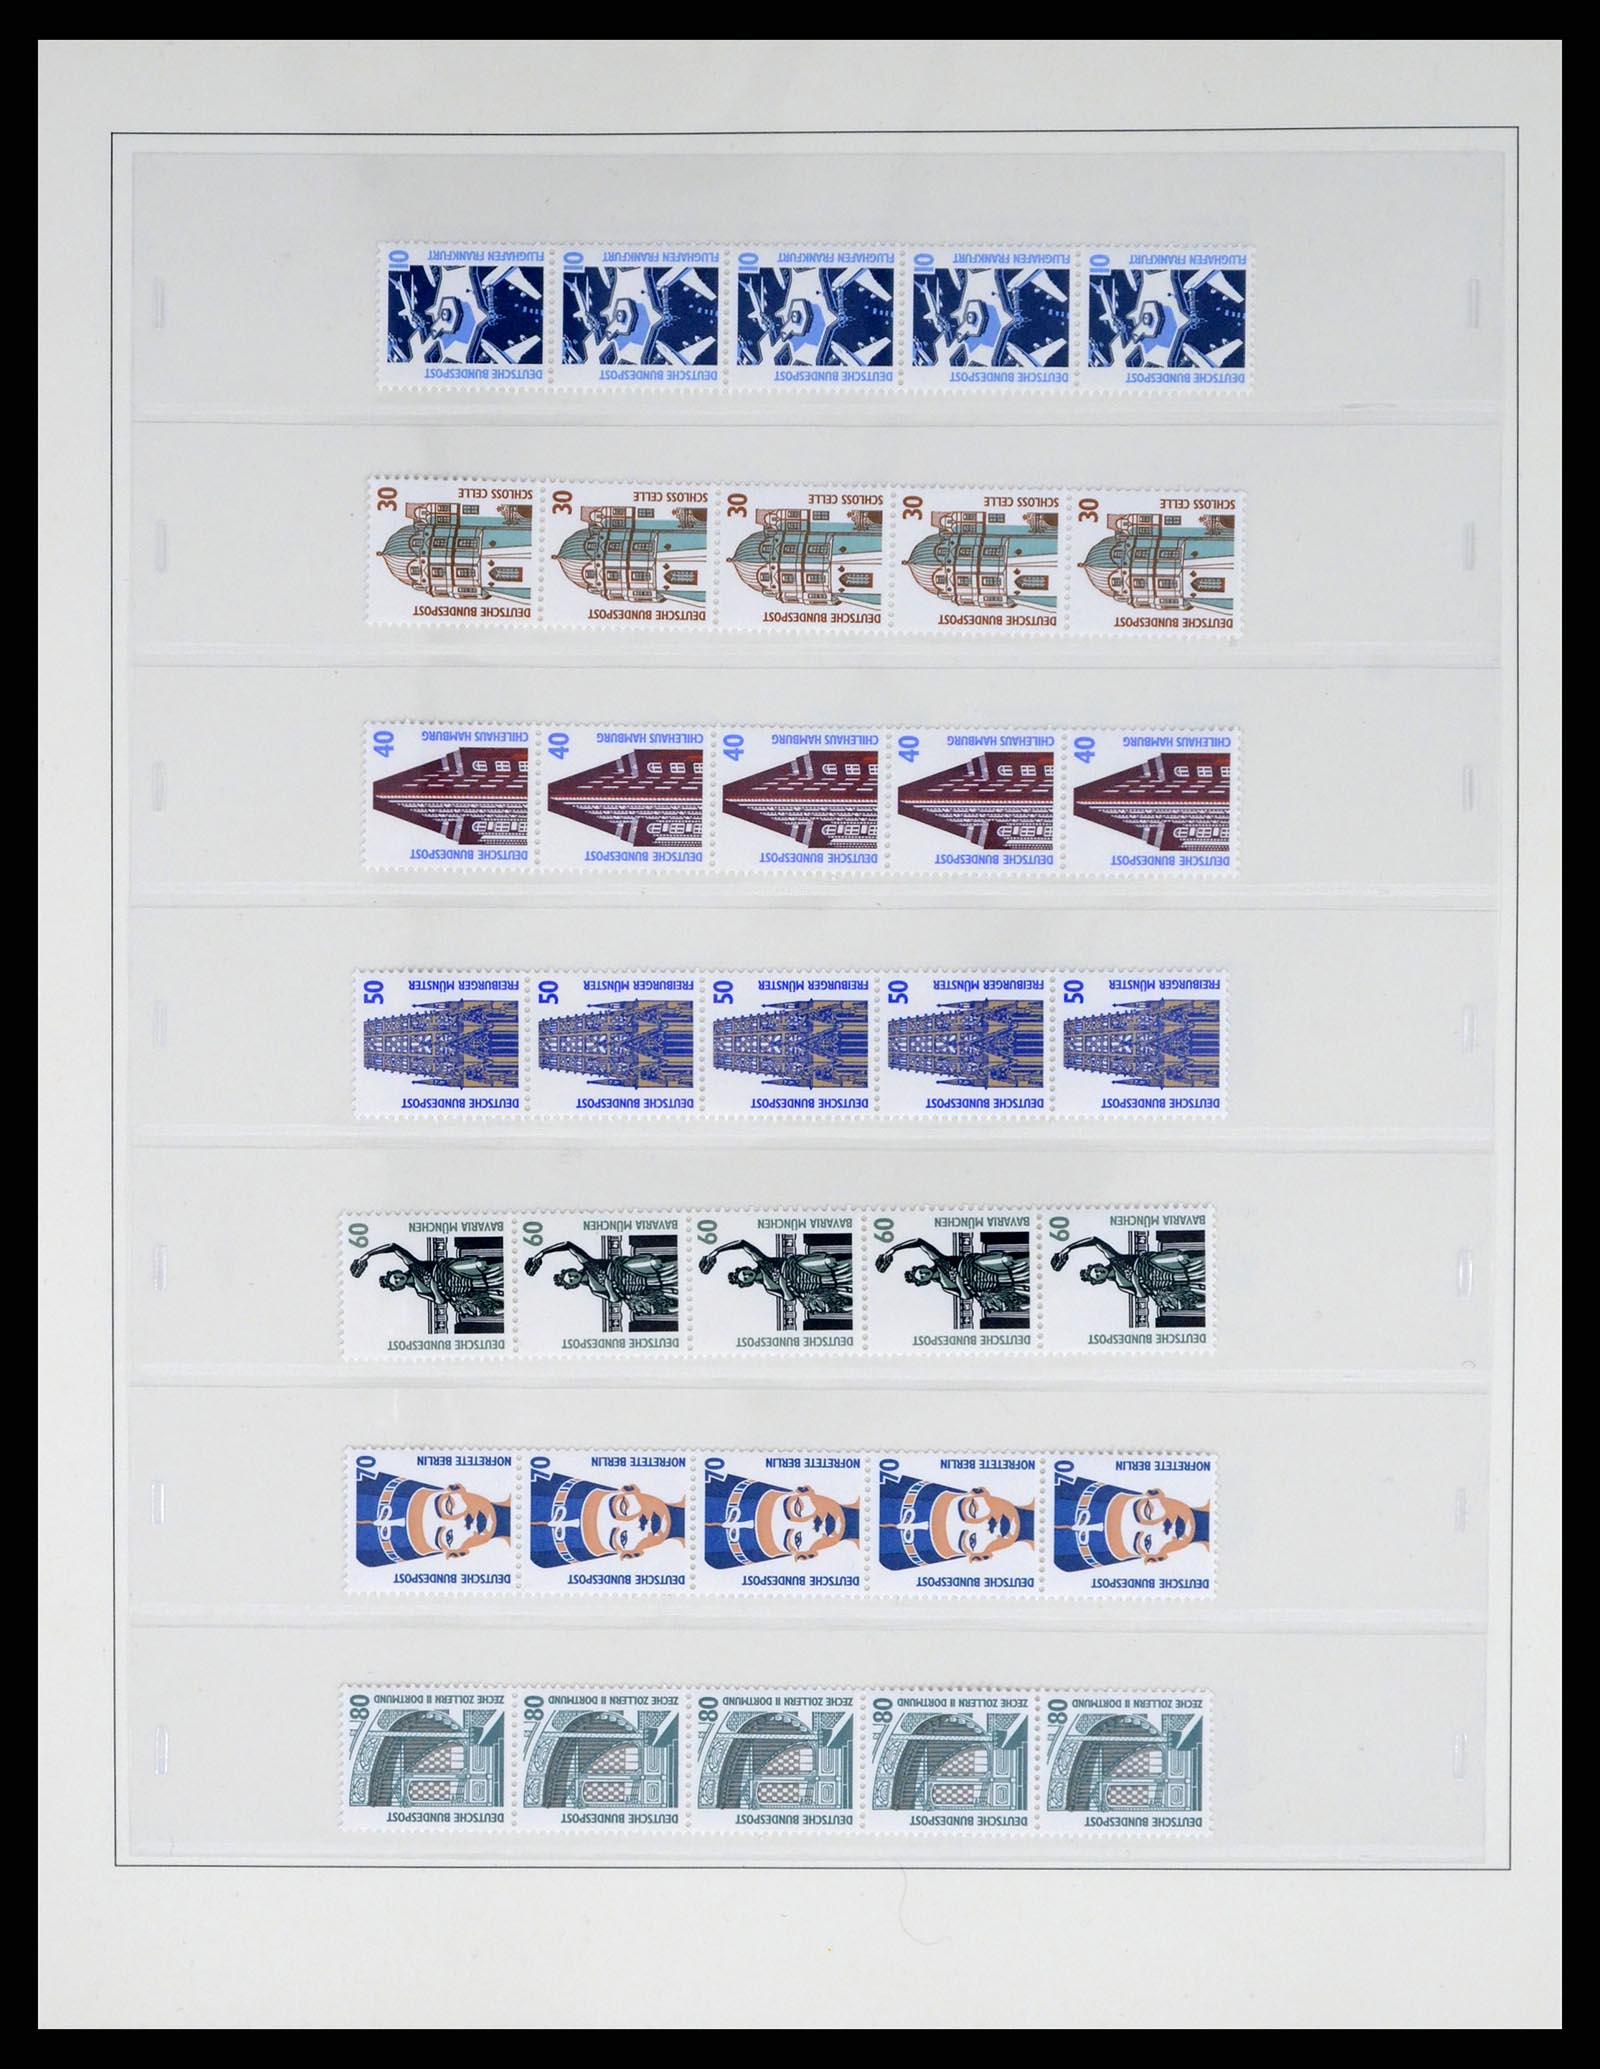 37354 019 - Stamp collection 37354 Bundespost and Berlin 1955-2000.